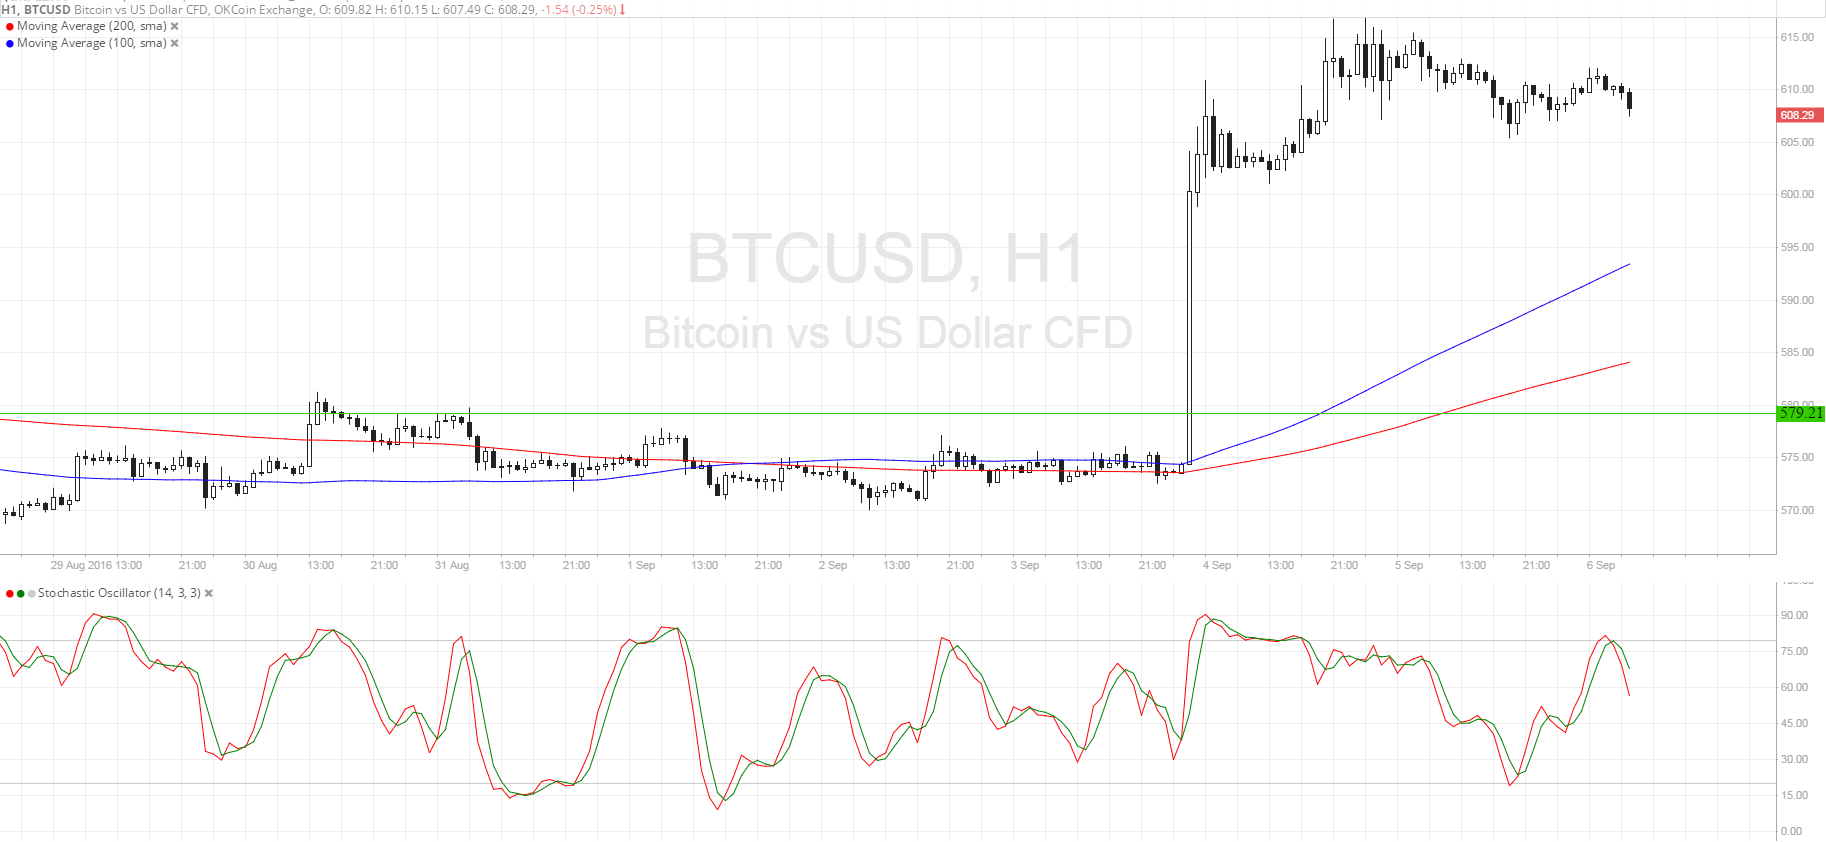 Bitcoin Price Technical Analysis for 09/06/2016 - Potential Pullback Levels